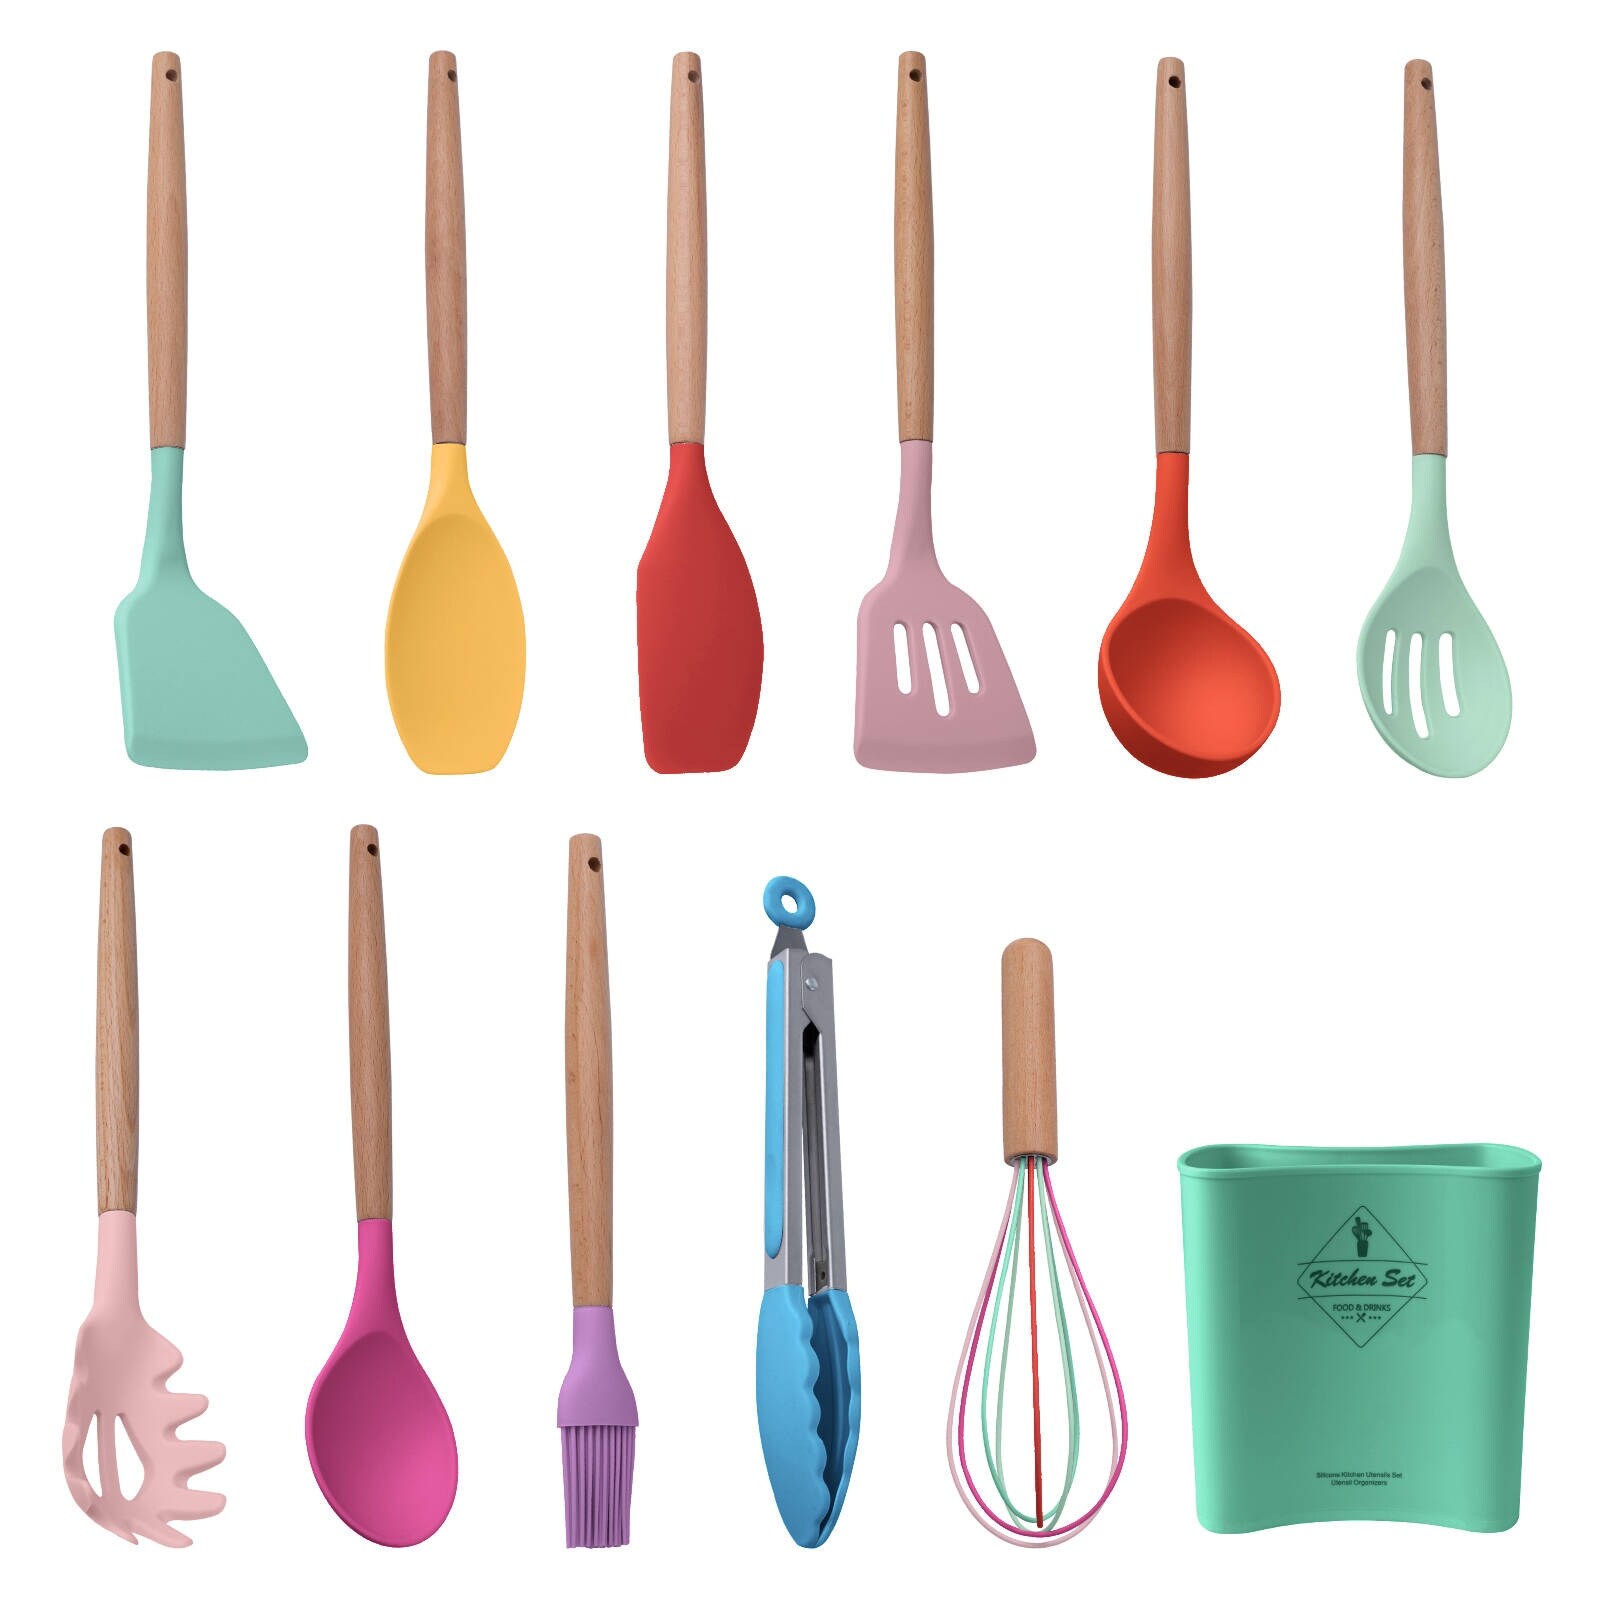 https://ak1.ostkcdn.com/images/products/is/images/direct/4f114e3cf5af22669b8b6b6634794548718b088c/12-Piece-Silicone-Kitchen-Utensils-Set.jpg